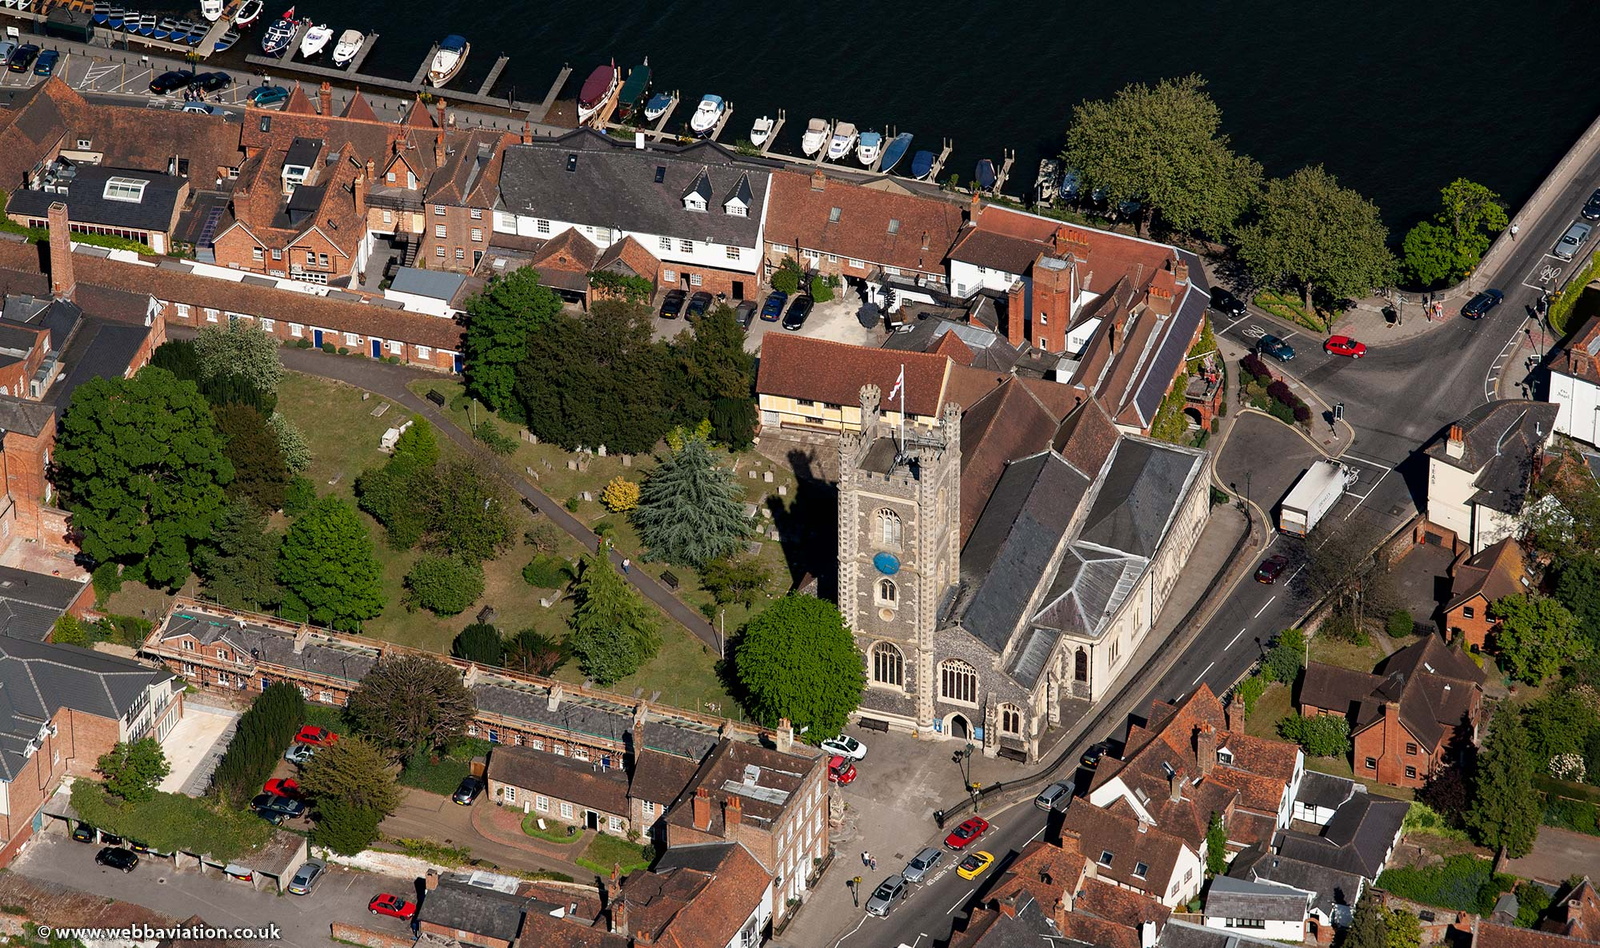  St Mary’s Church, Henley-on-Thames from the air